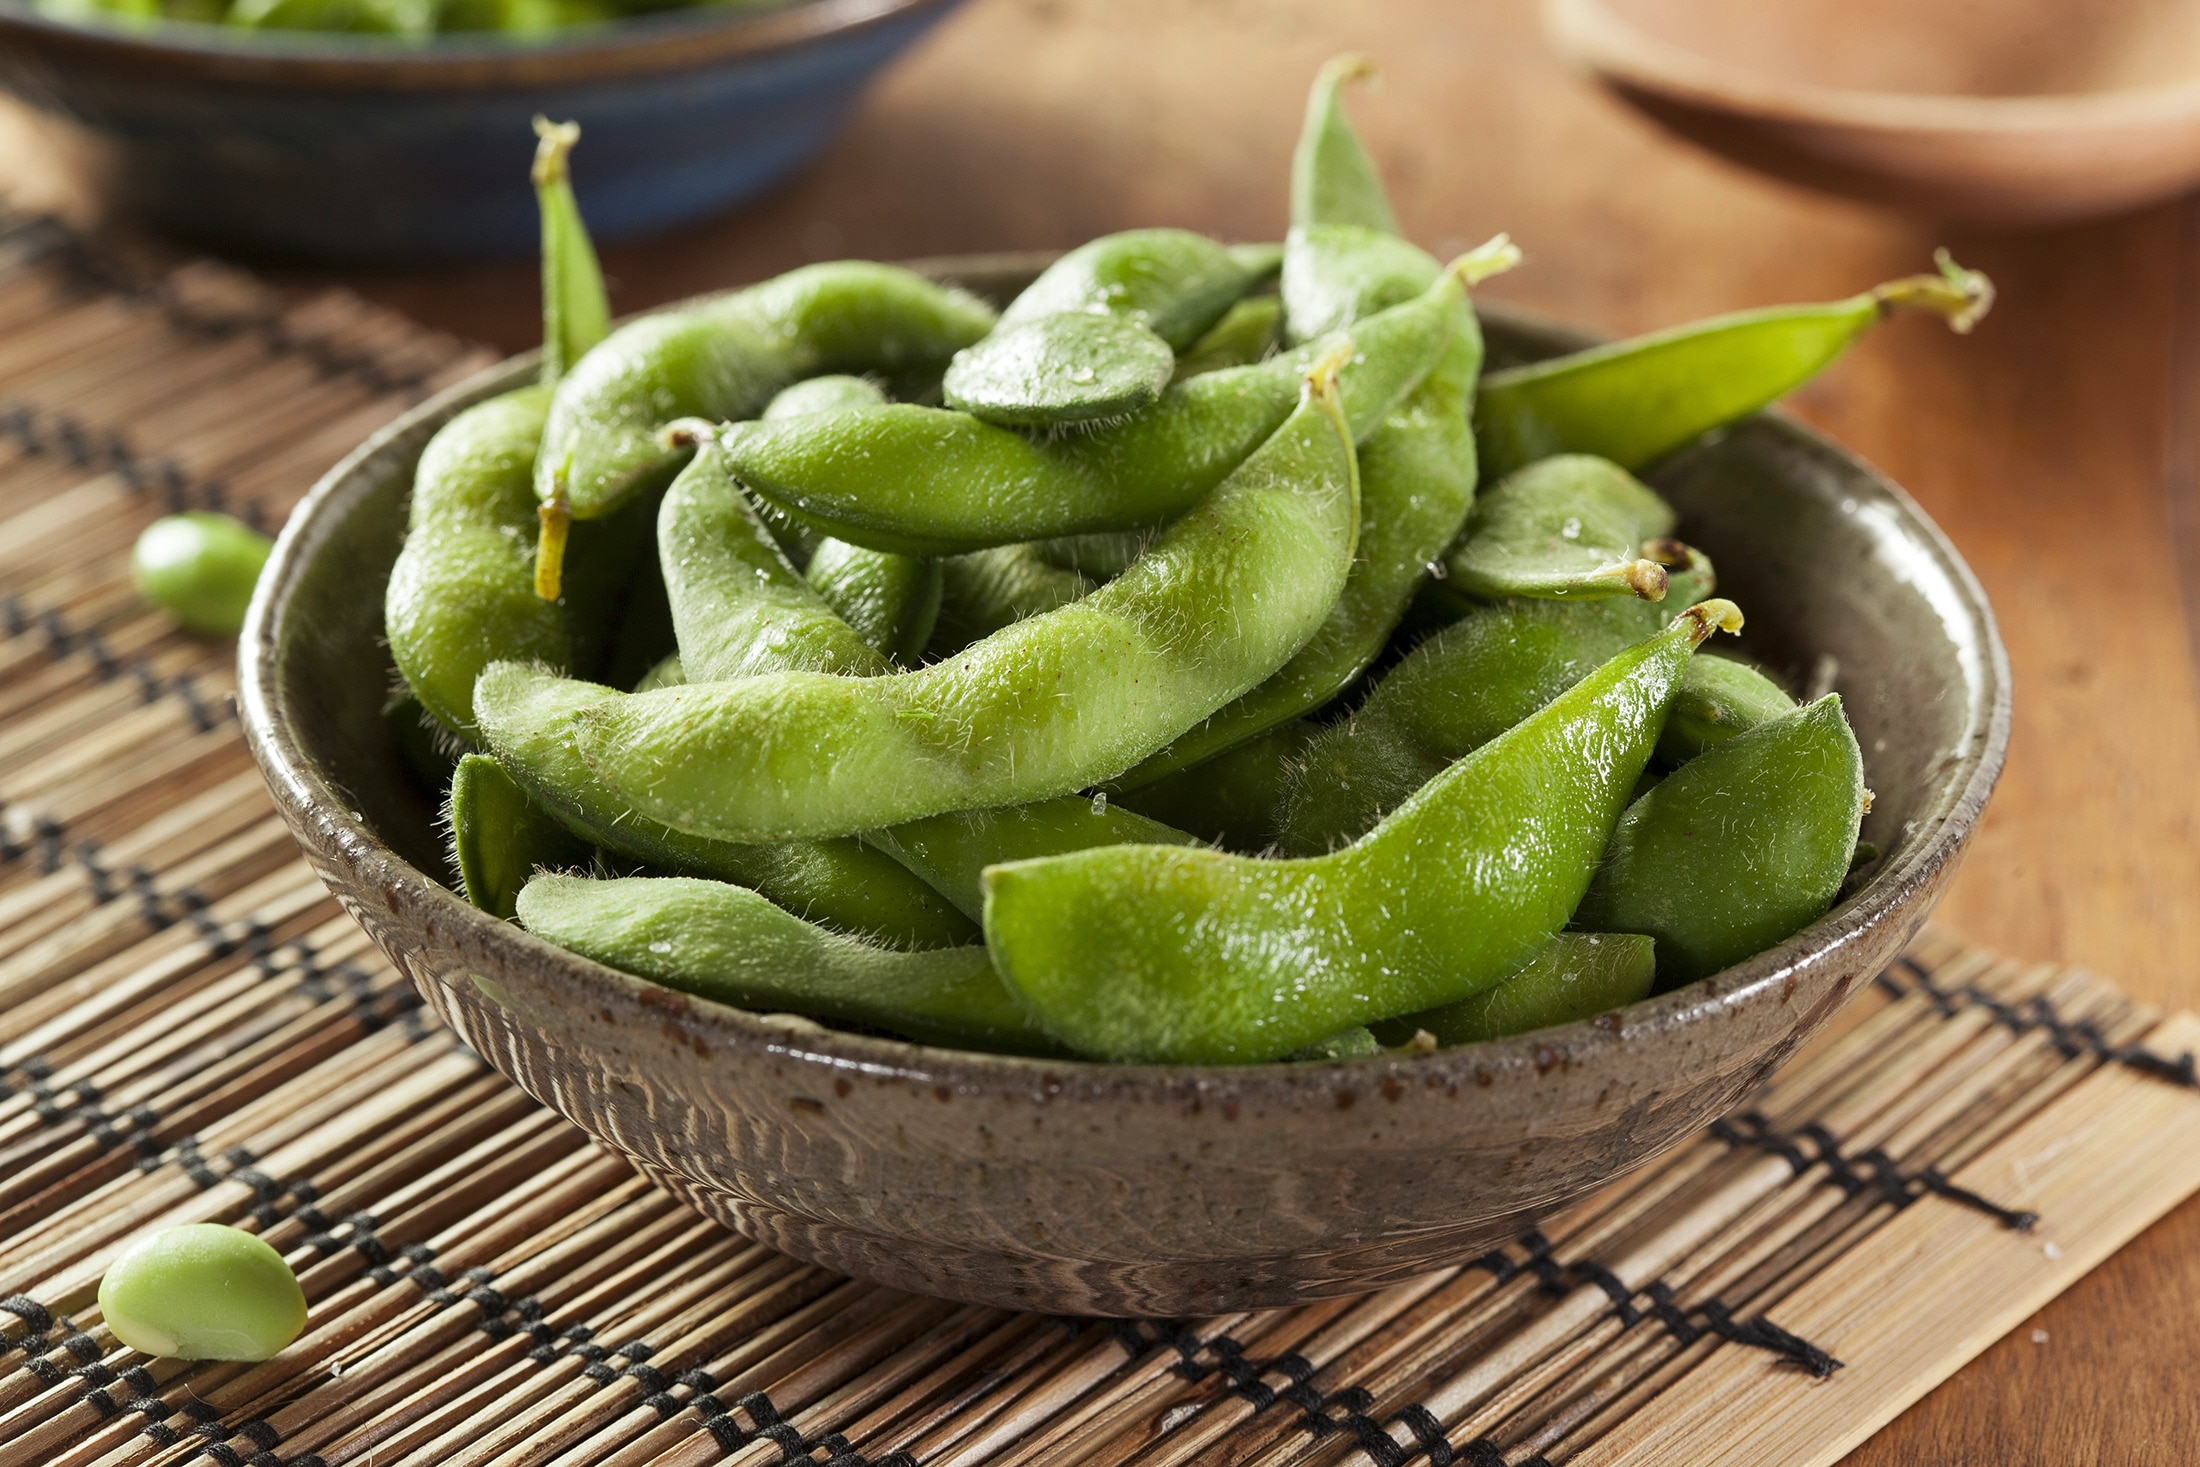 A bowl of edamame on a wooden table